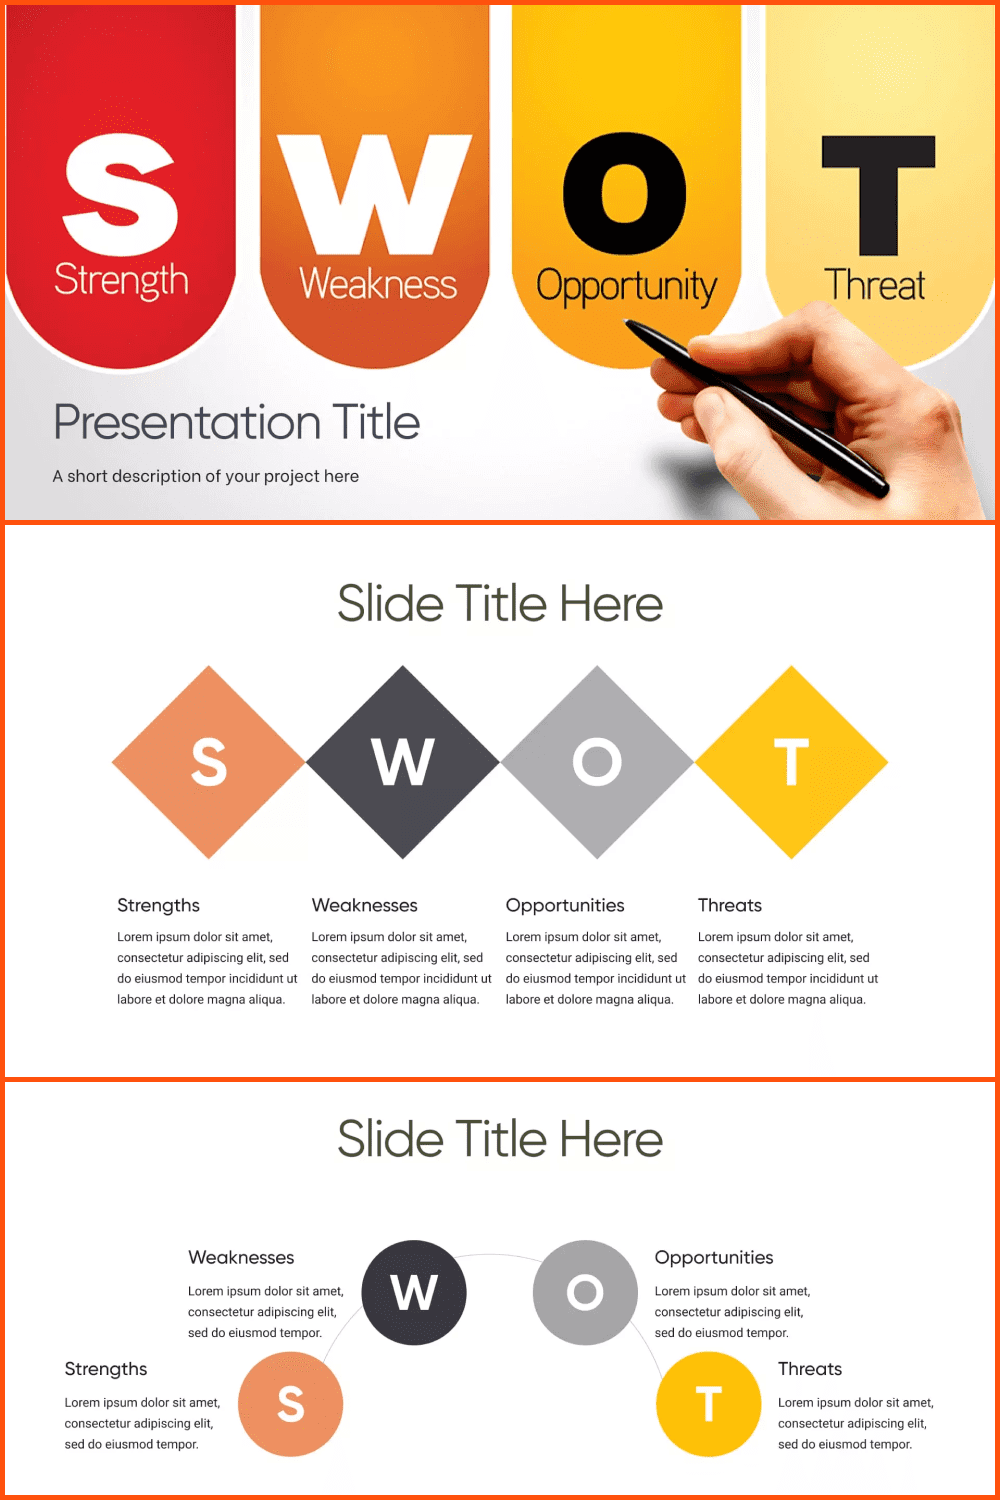 SWOT Analysis Business Template Powerpoint.